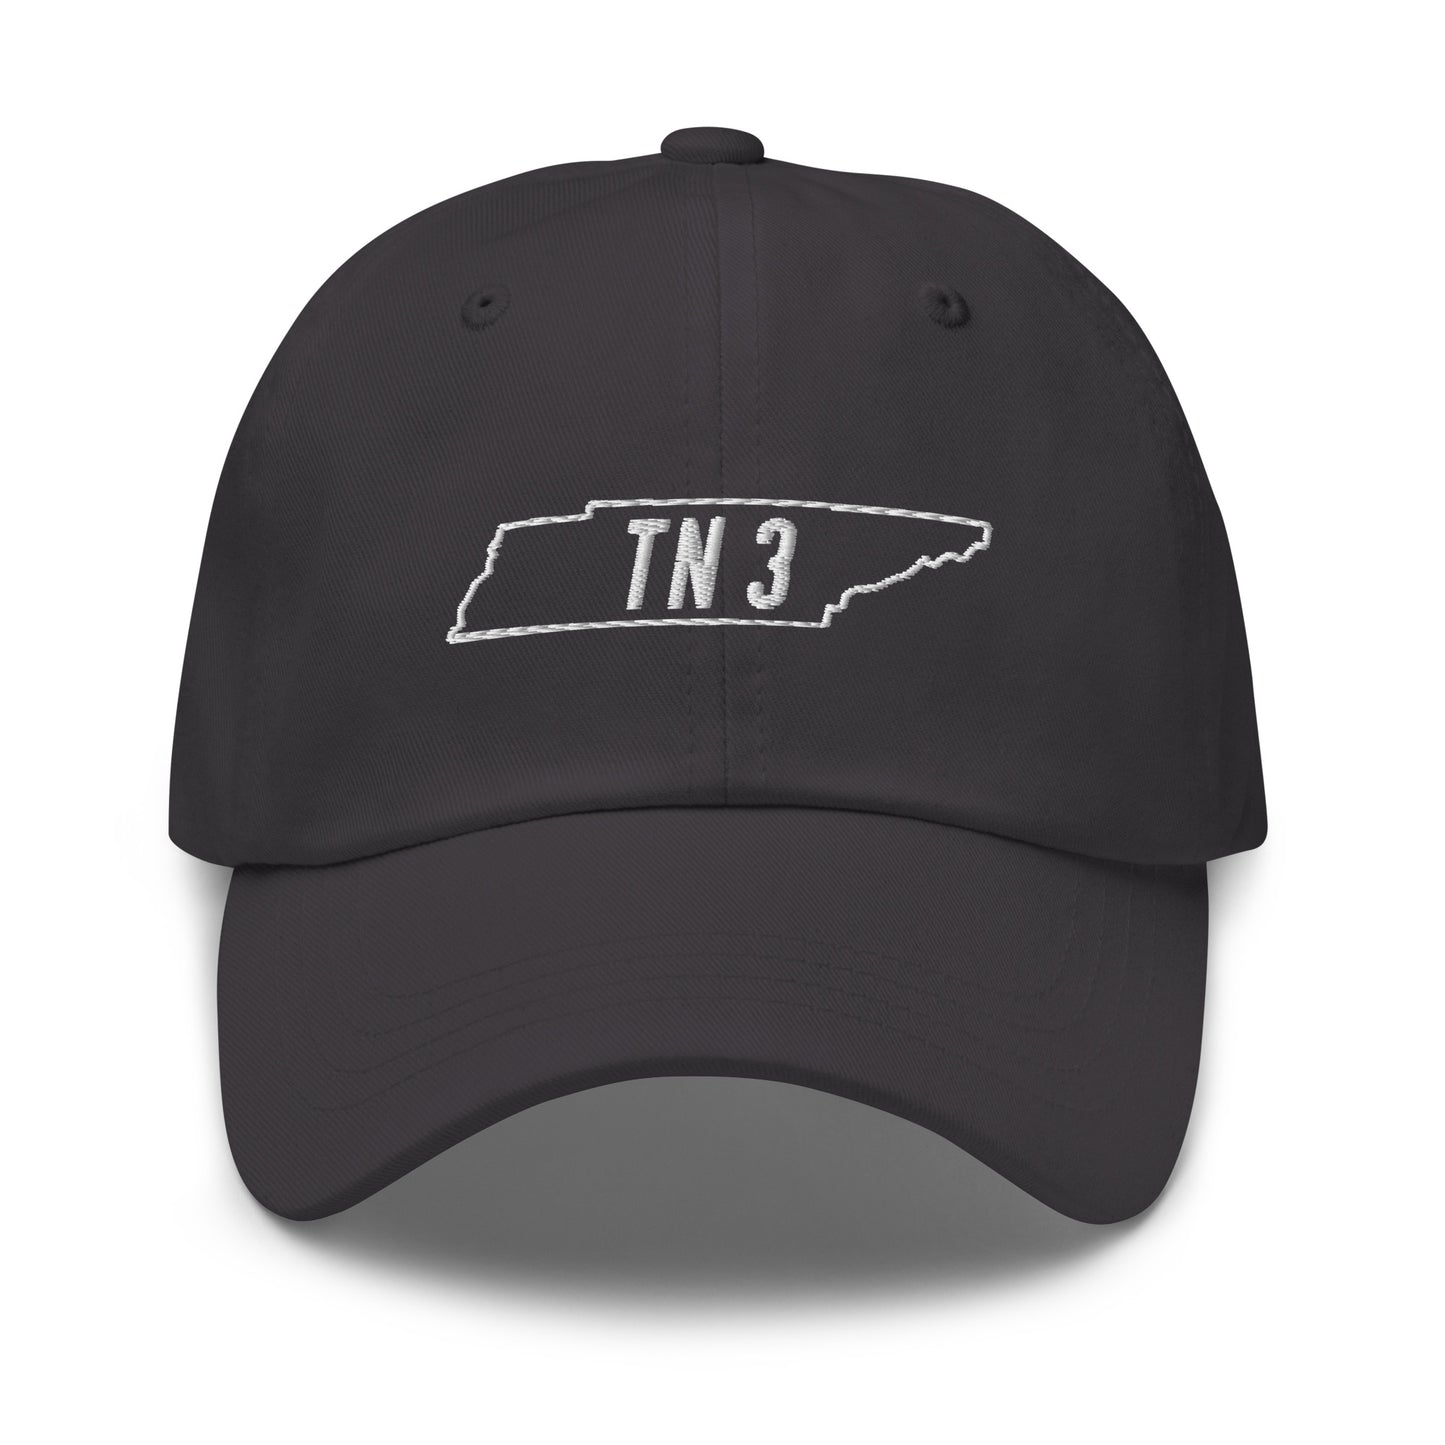 Tennessee 3 Protest Hat